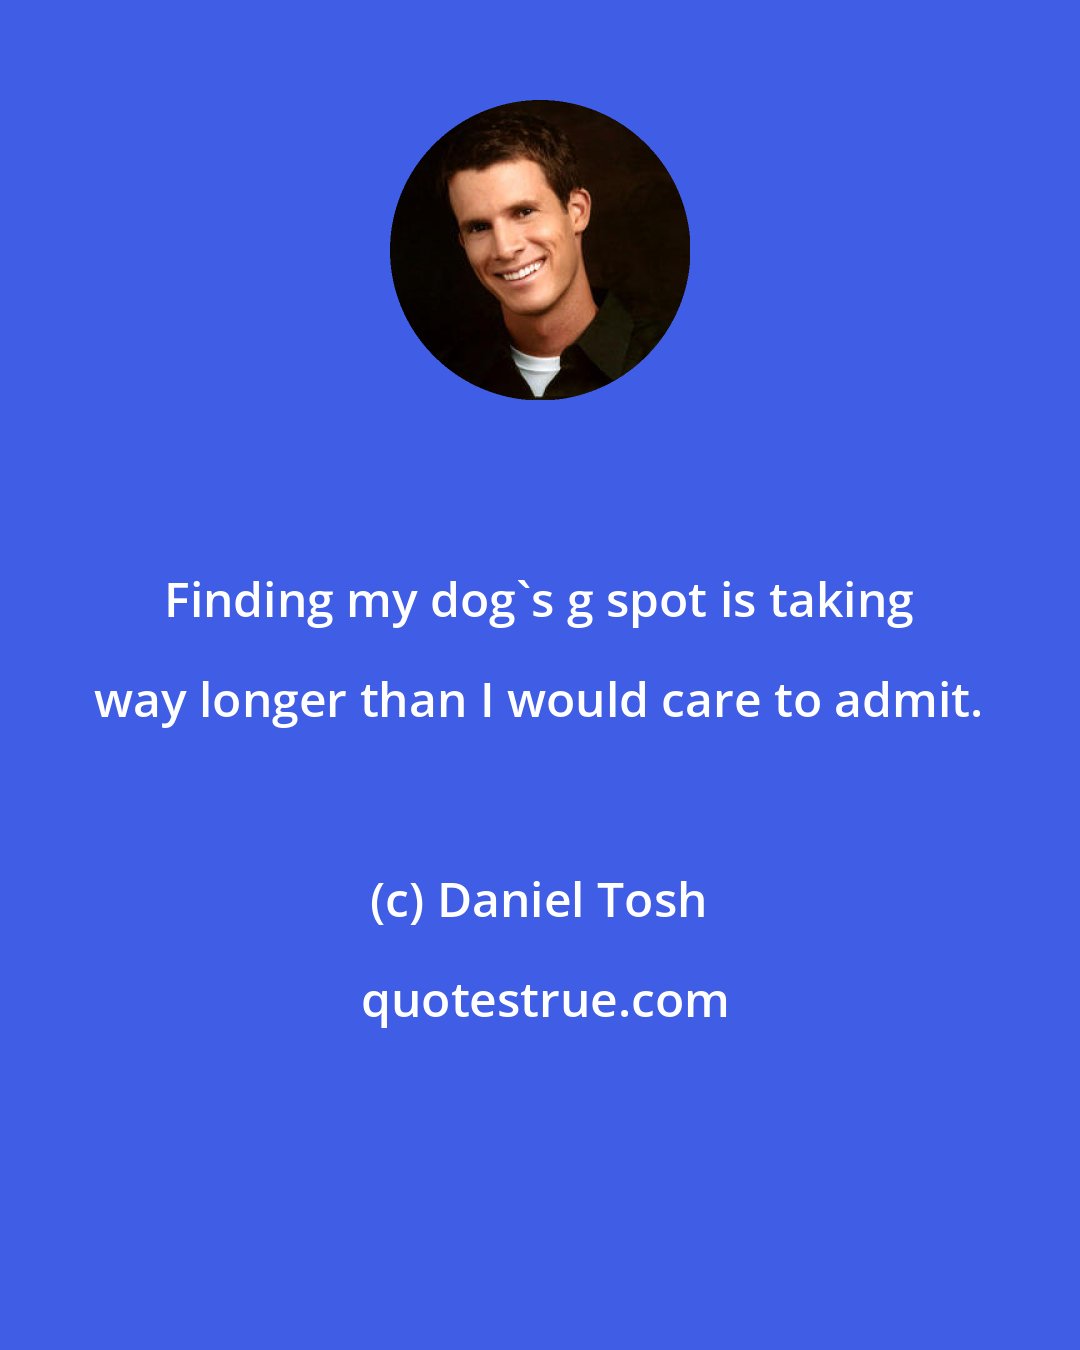 Daniel Tosh: Finding my dog's g spot is taking way longer than I would care to admit.